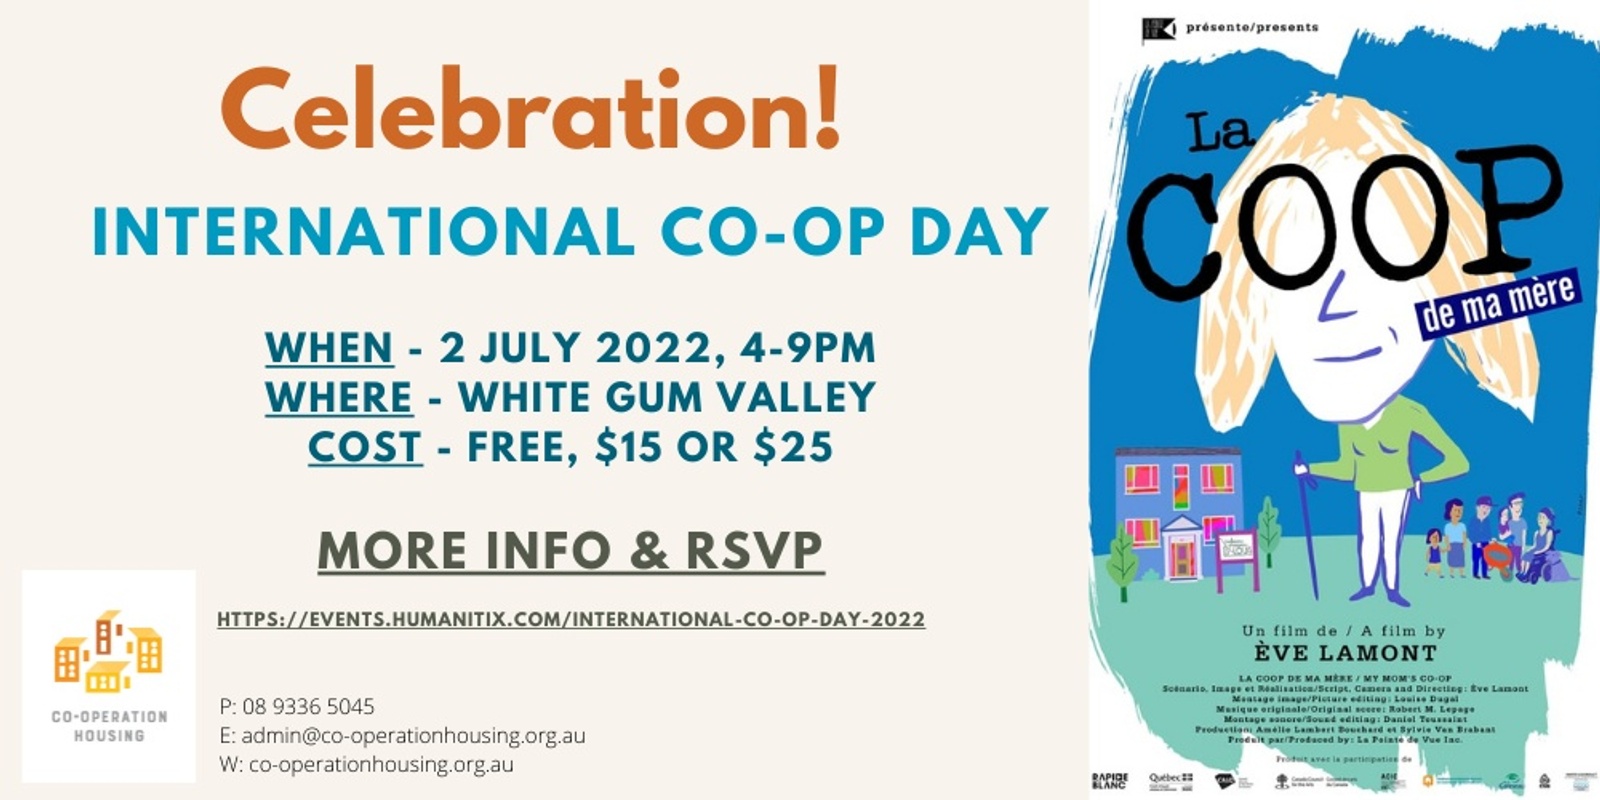 Banner image for International Co-op Day 2022